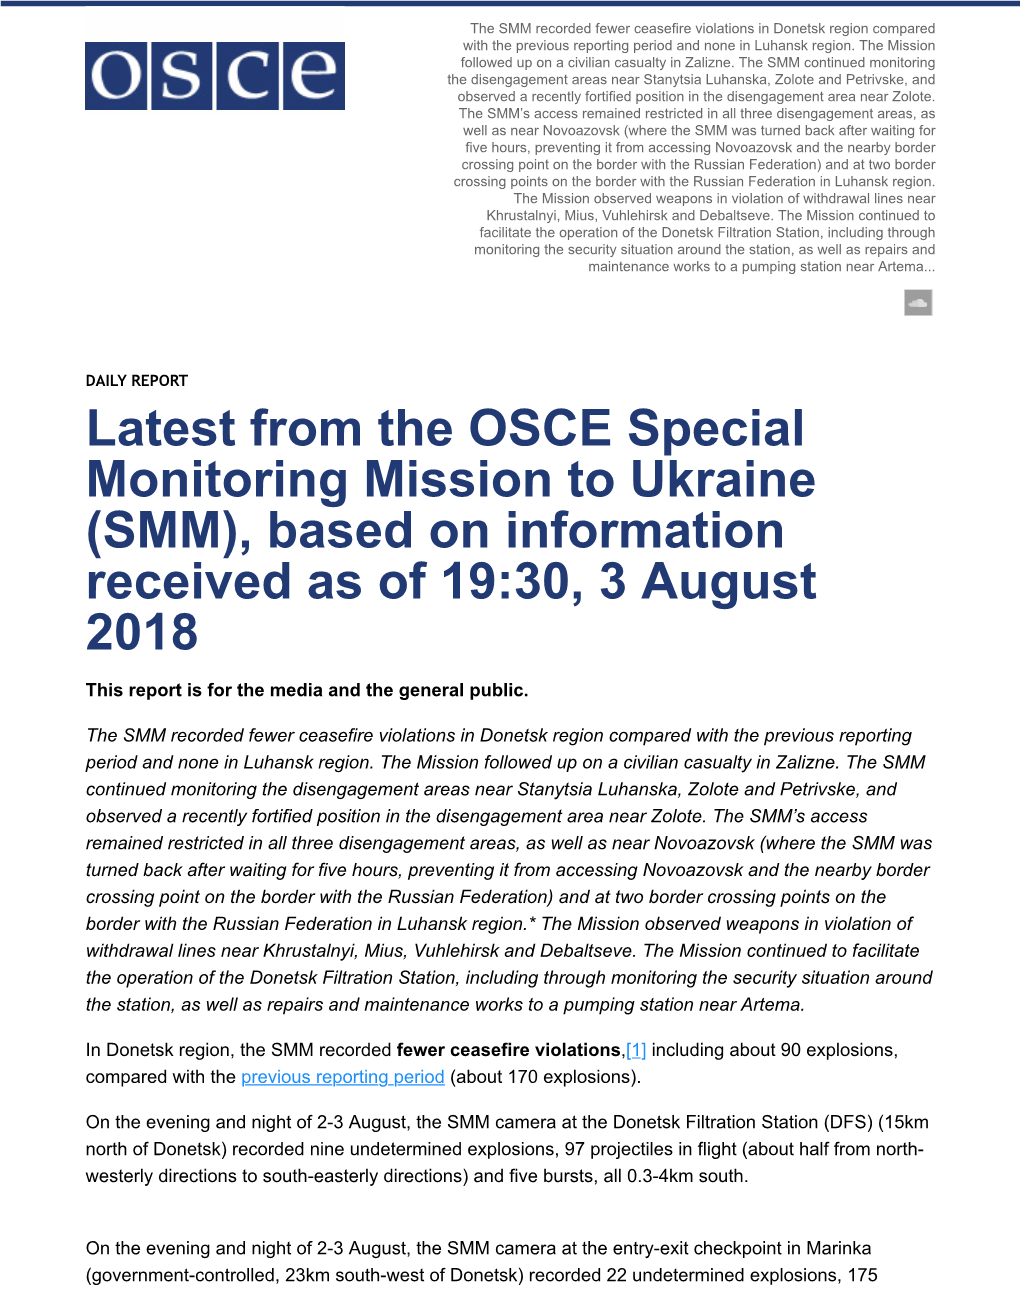 Latest from the OSCE Special Monitoring Mission to Ukraine (SMM), Based on Information Received As of 19:30, 3 August 2018